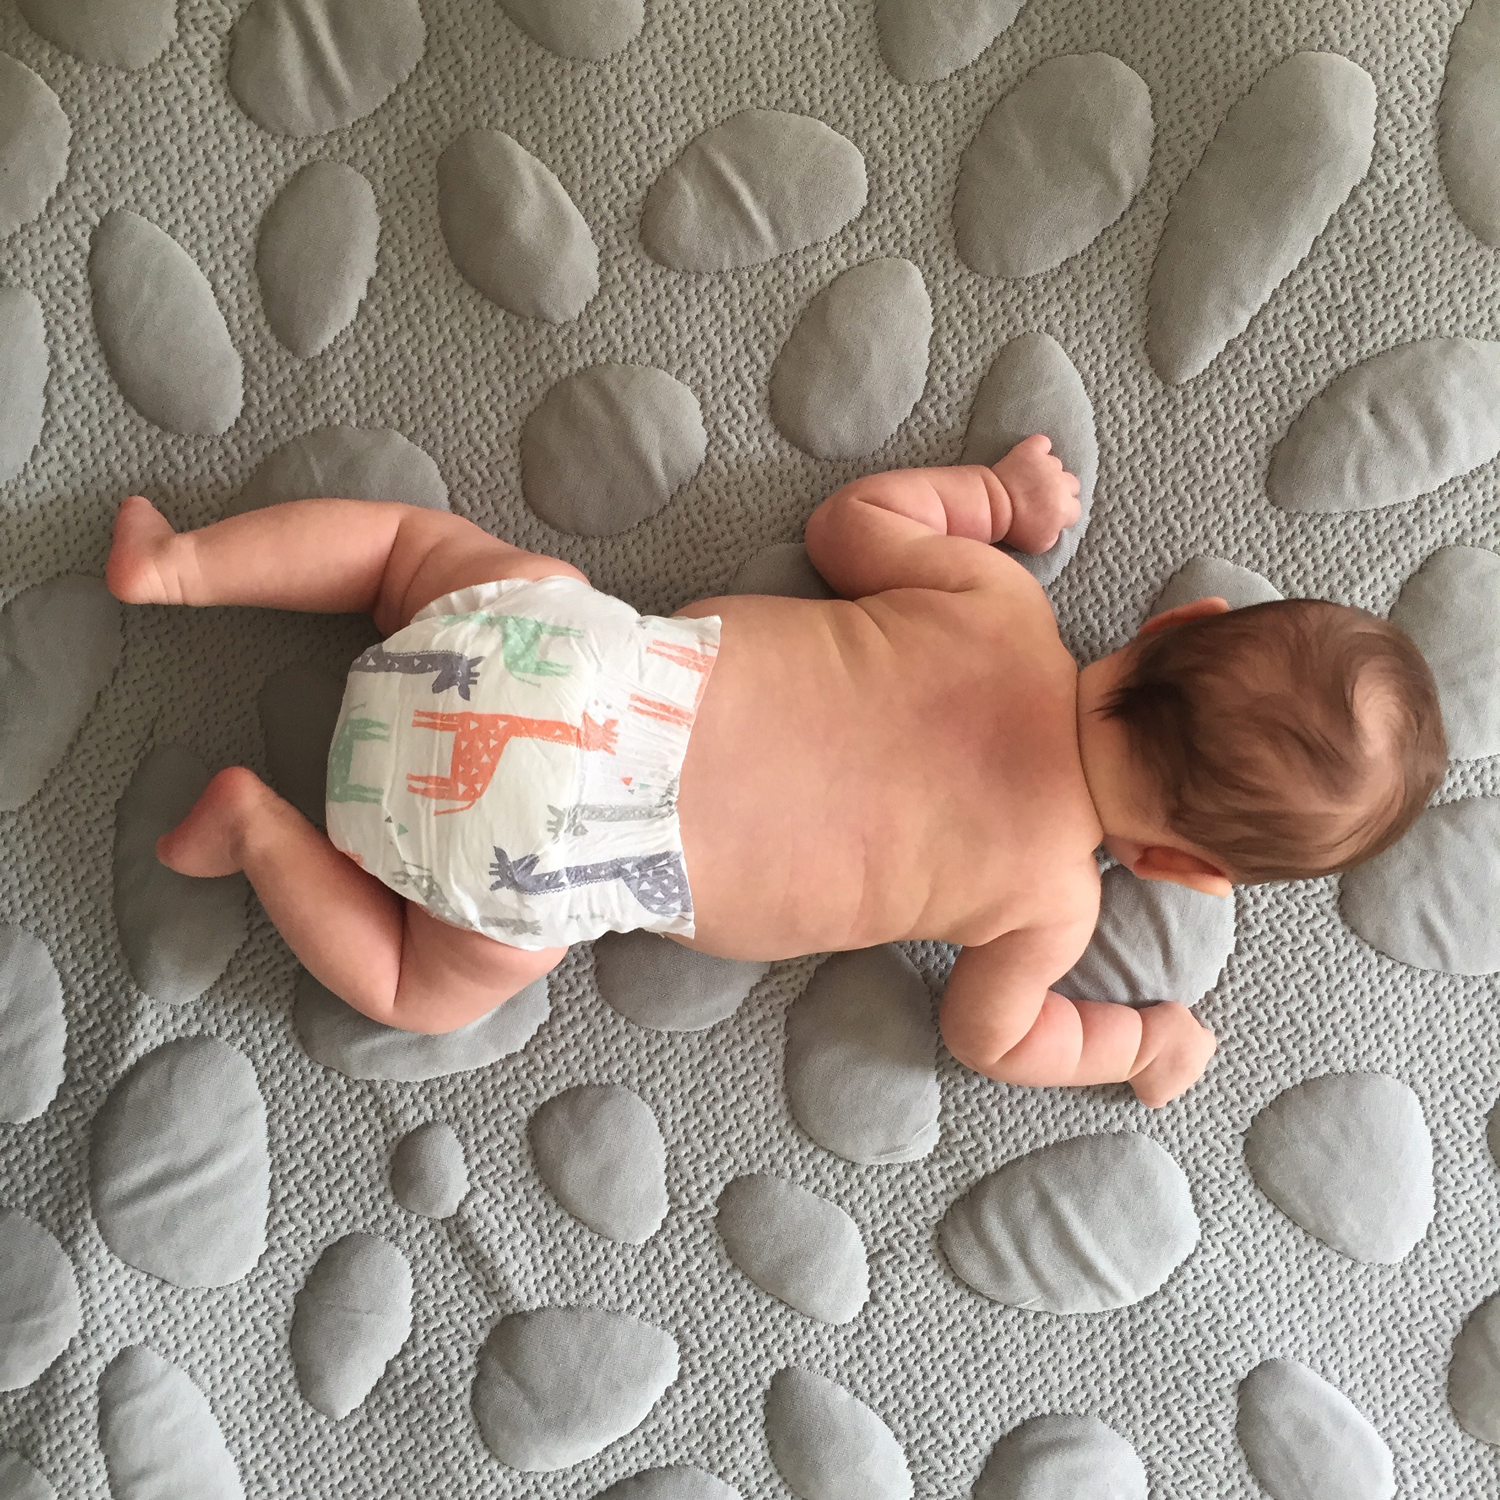 Tummy Time in a Tight Space